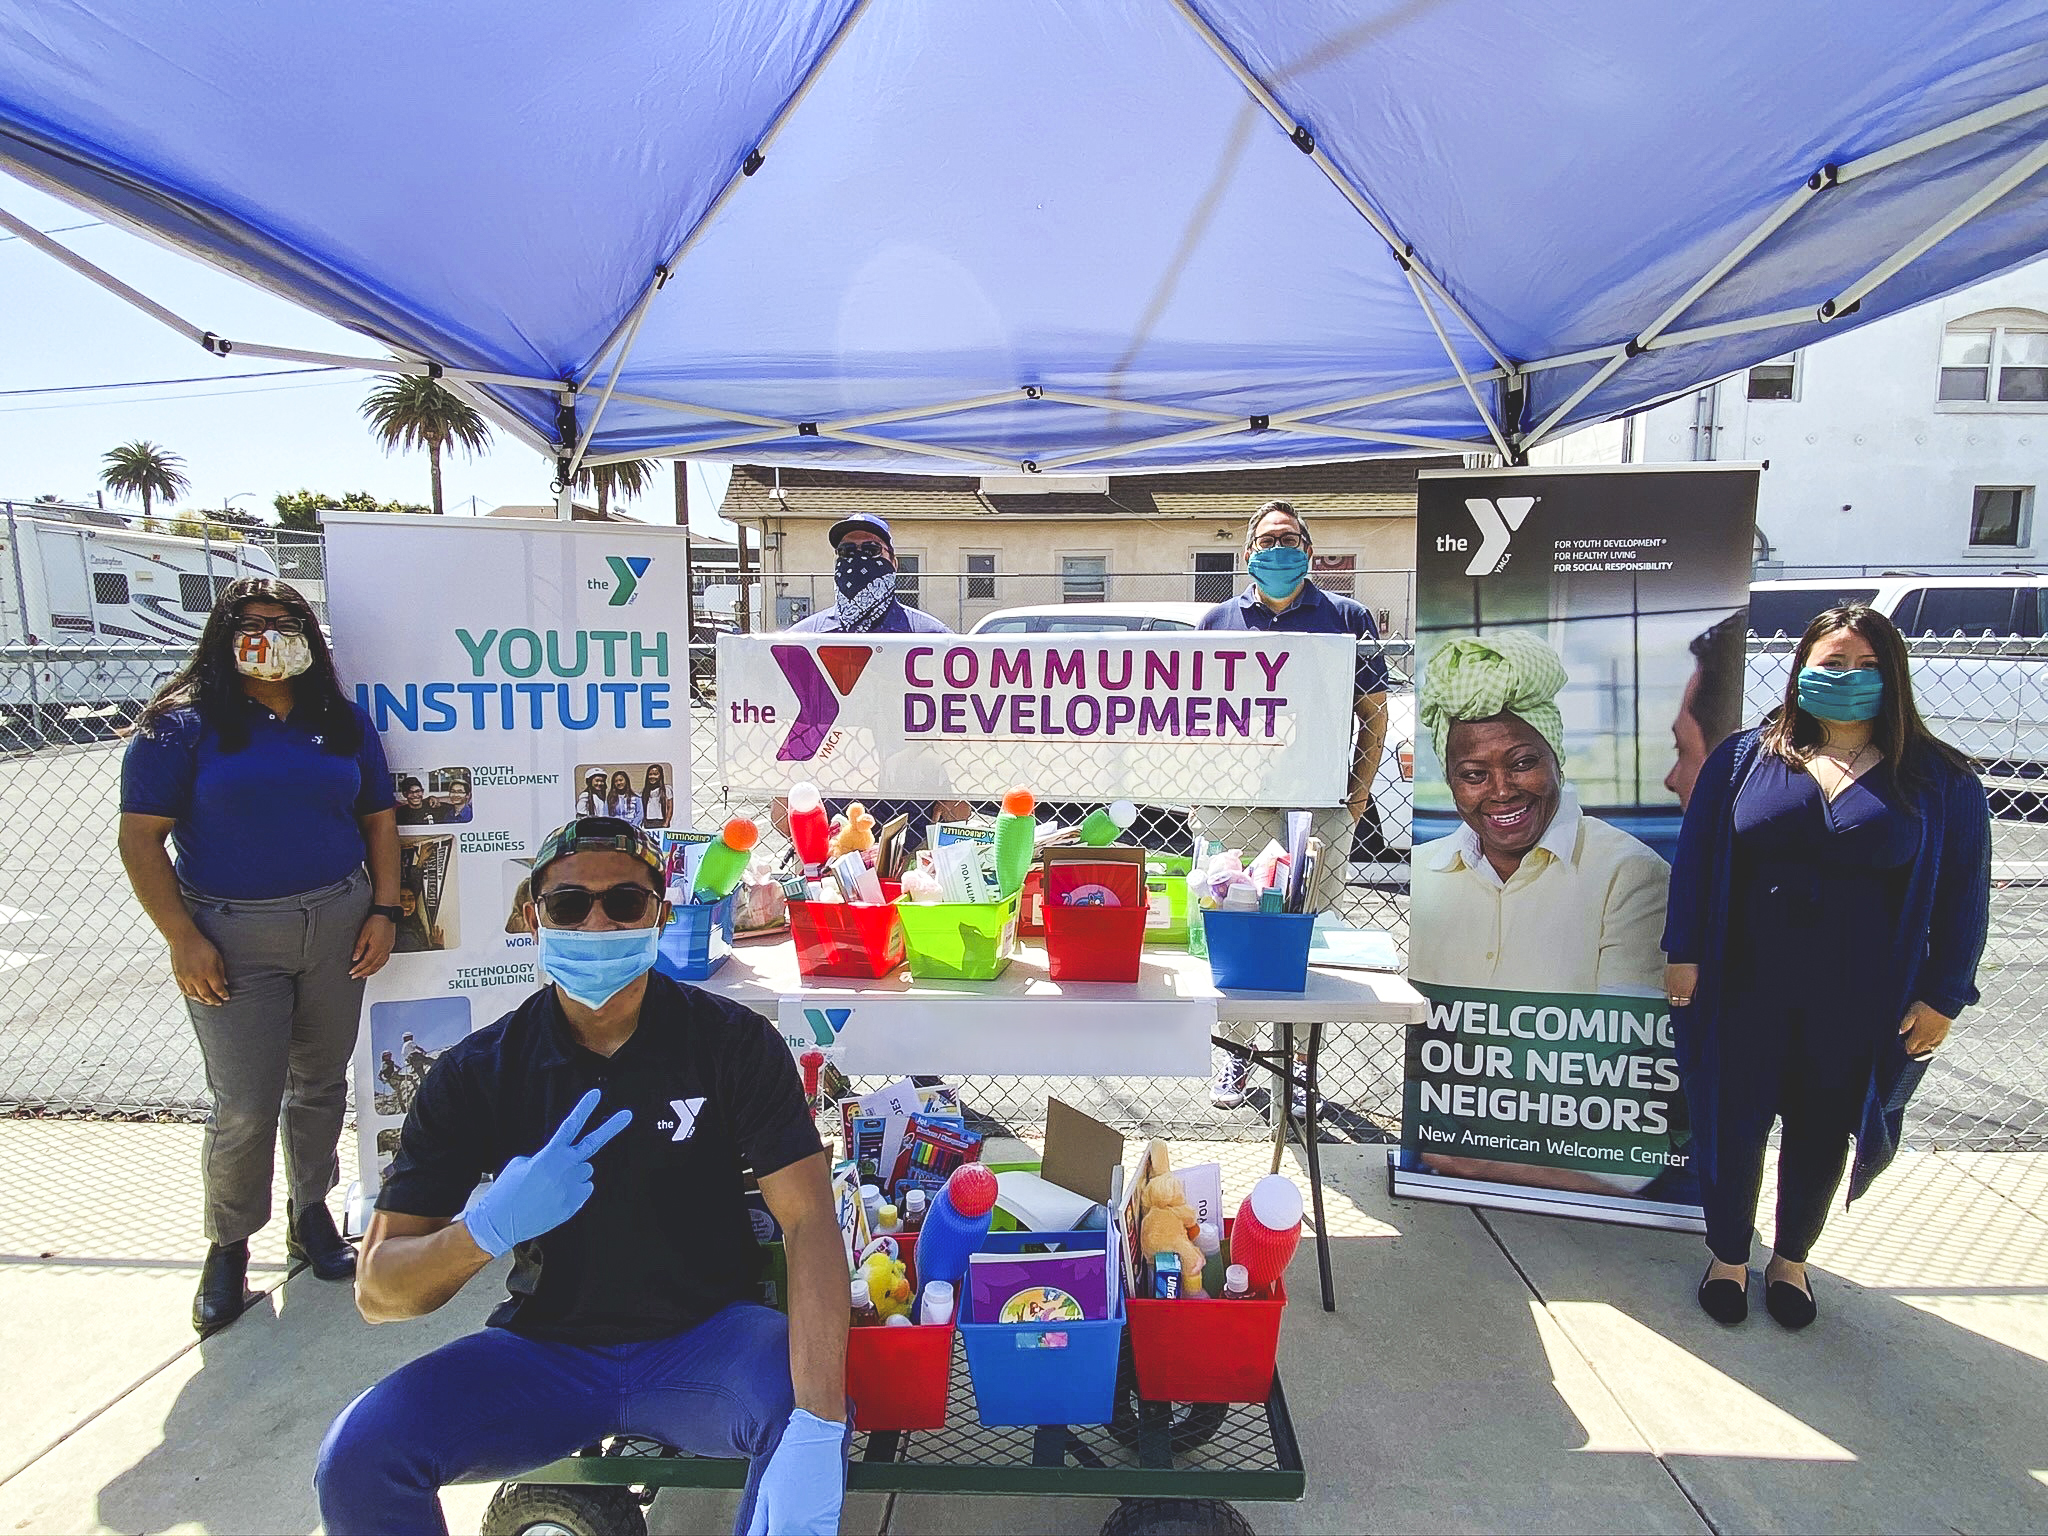 A diverse group of people wearing masks and gloves standing and sitting around some nright colored bins full of children's toys. There are 3 signs in the image, one says 